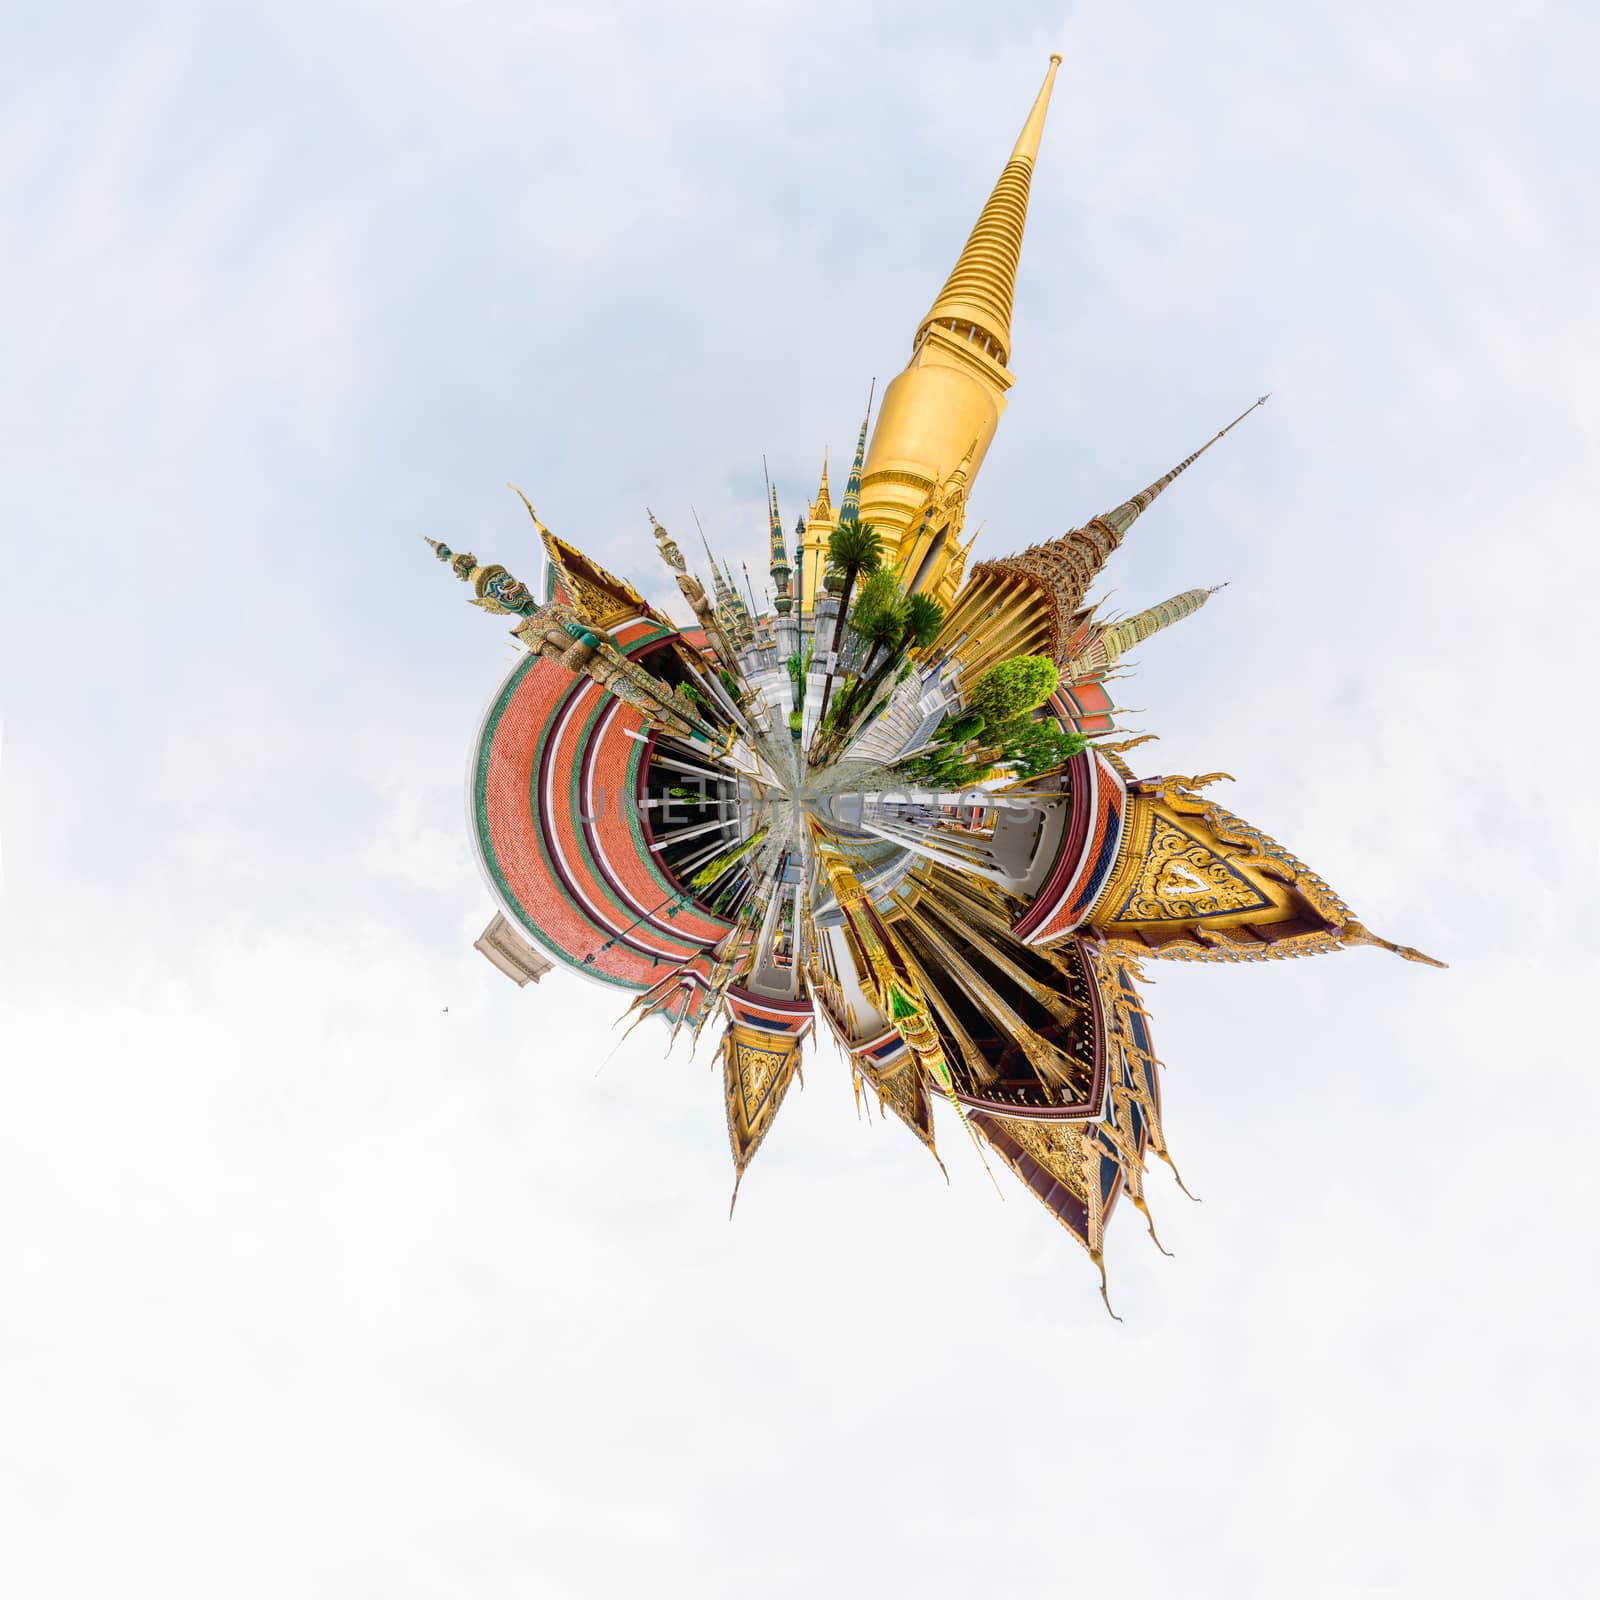 circle panorama of Panning view of Wat Phra Kaew or name The Temple of the Emerald Buddha